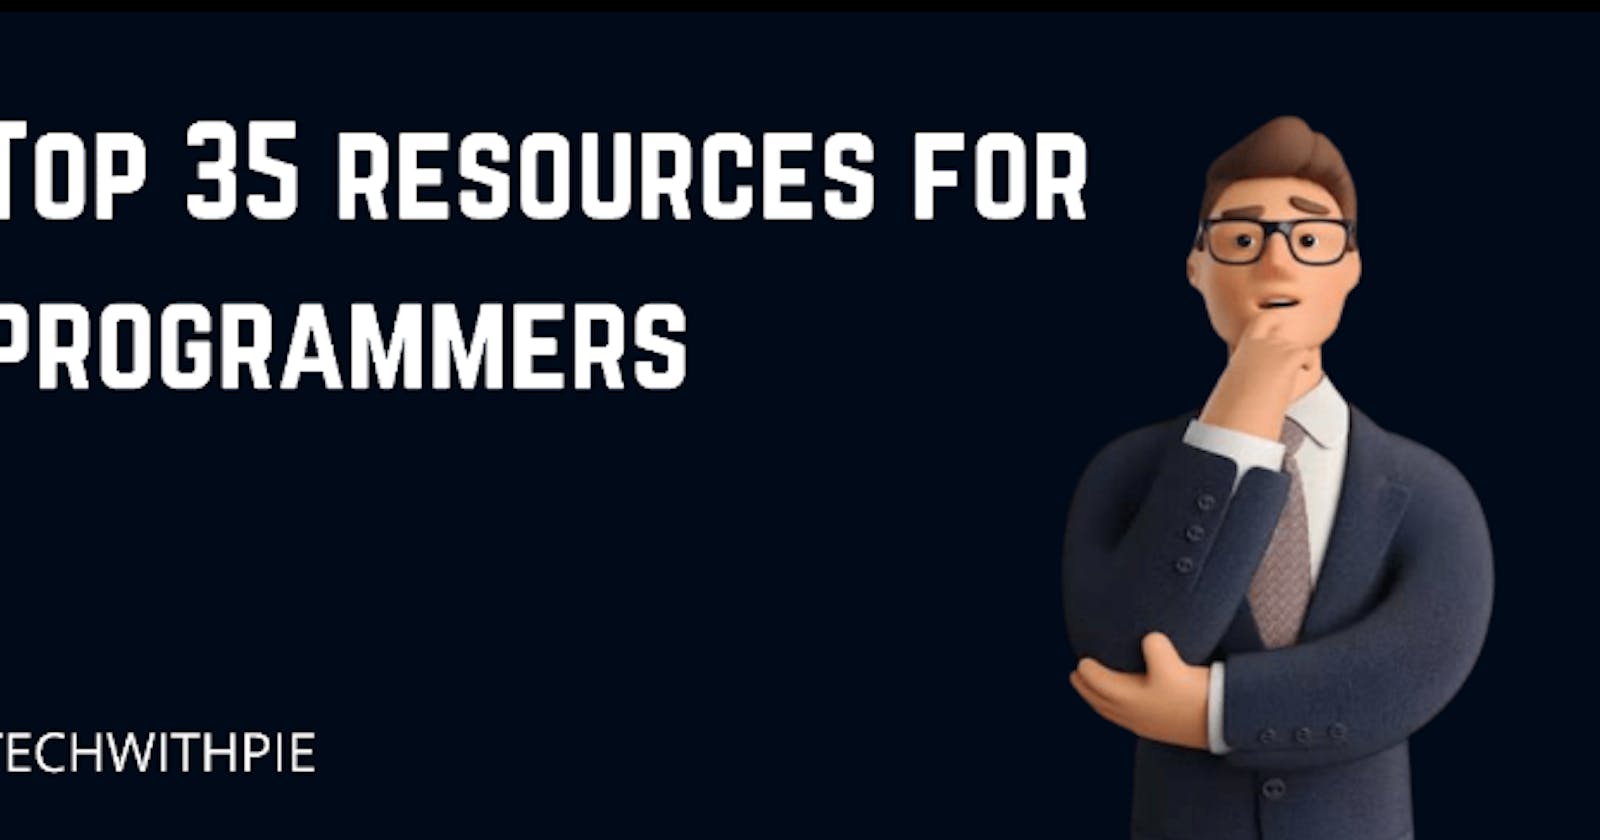 Top 35 resources for programmers 2022